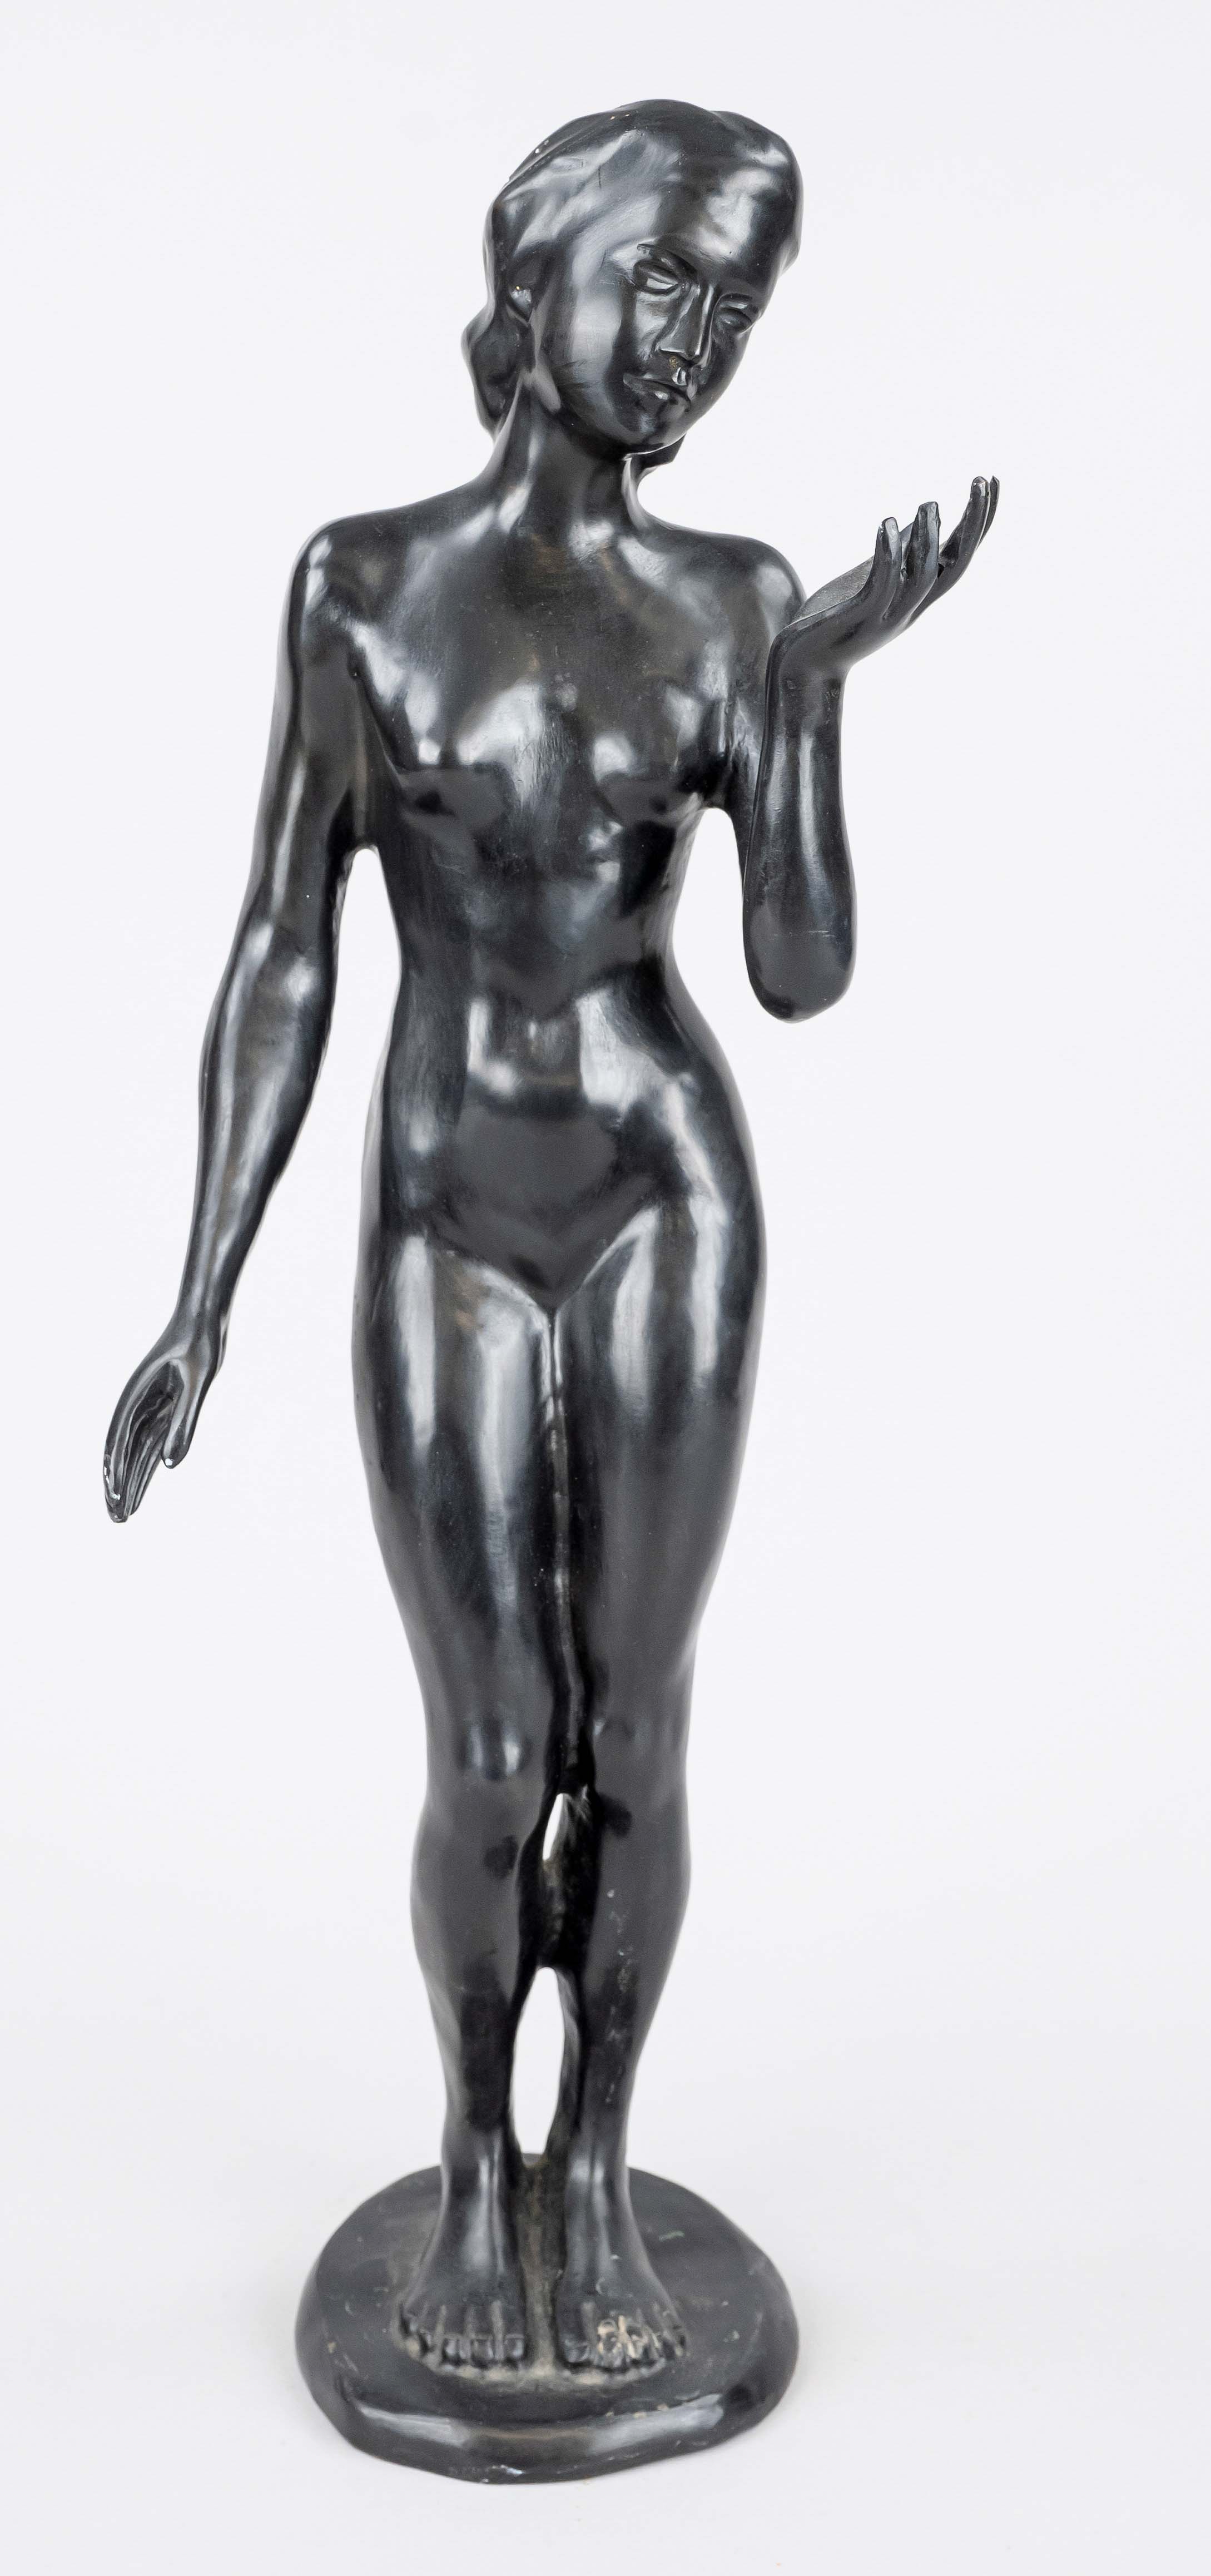 Sculptor of the 2nd half of the 20th century, young woman, standing female nude, idealized design in